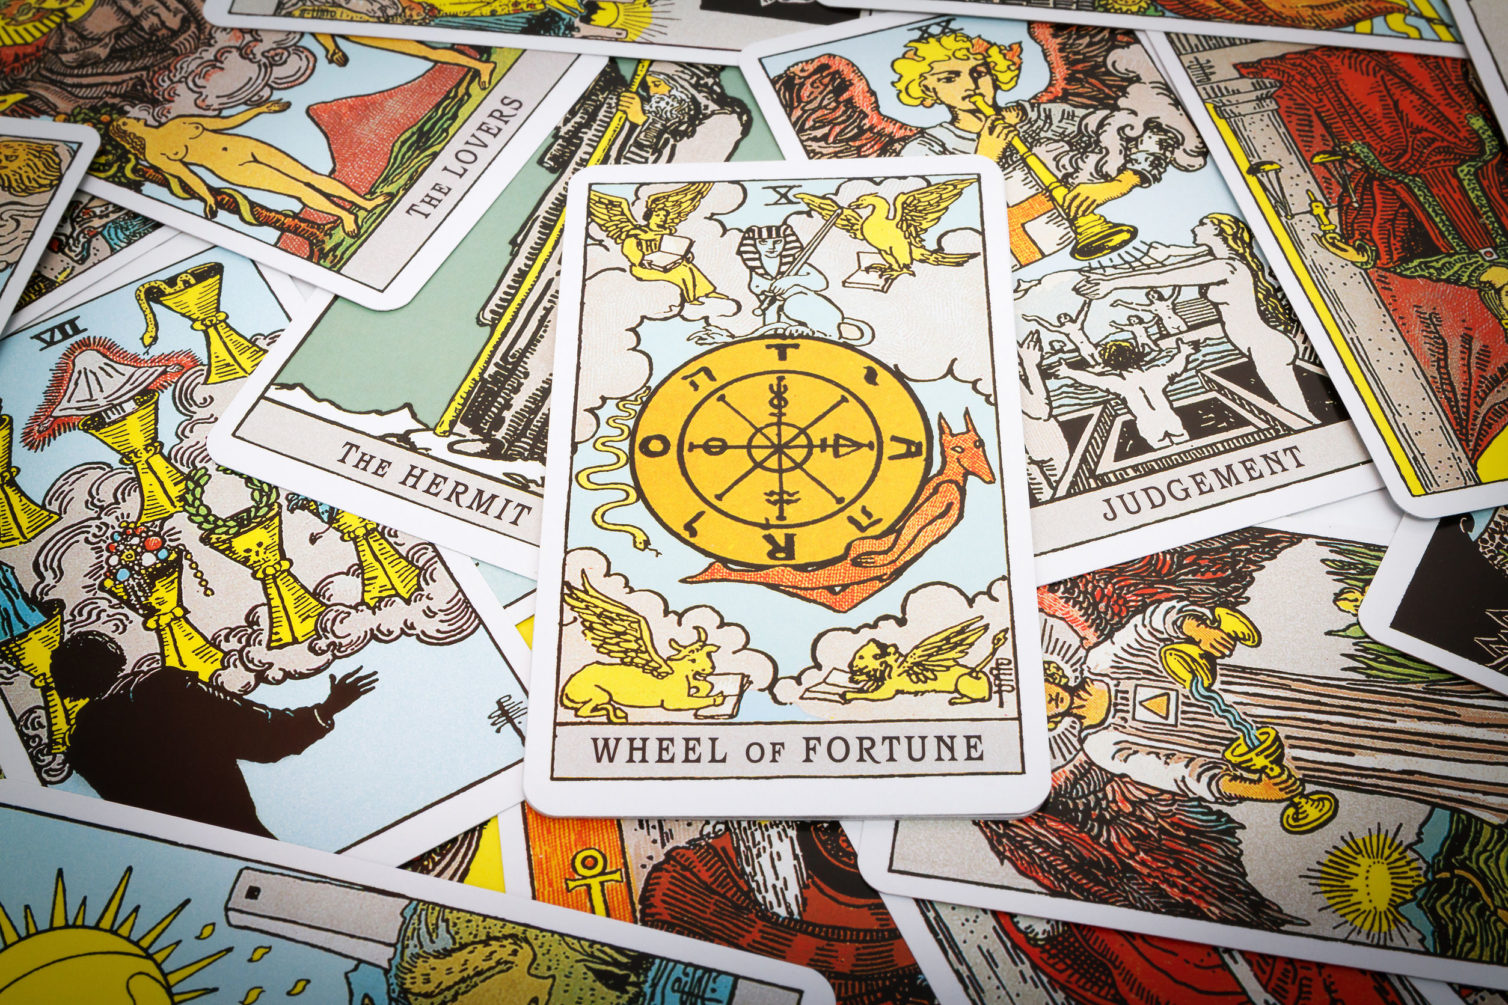 You are currently viewing Mit üzen a tarot tarot Decemberre?